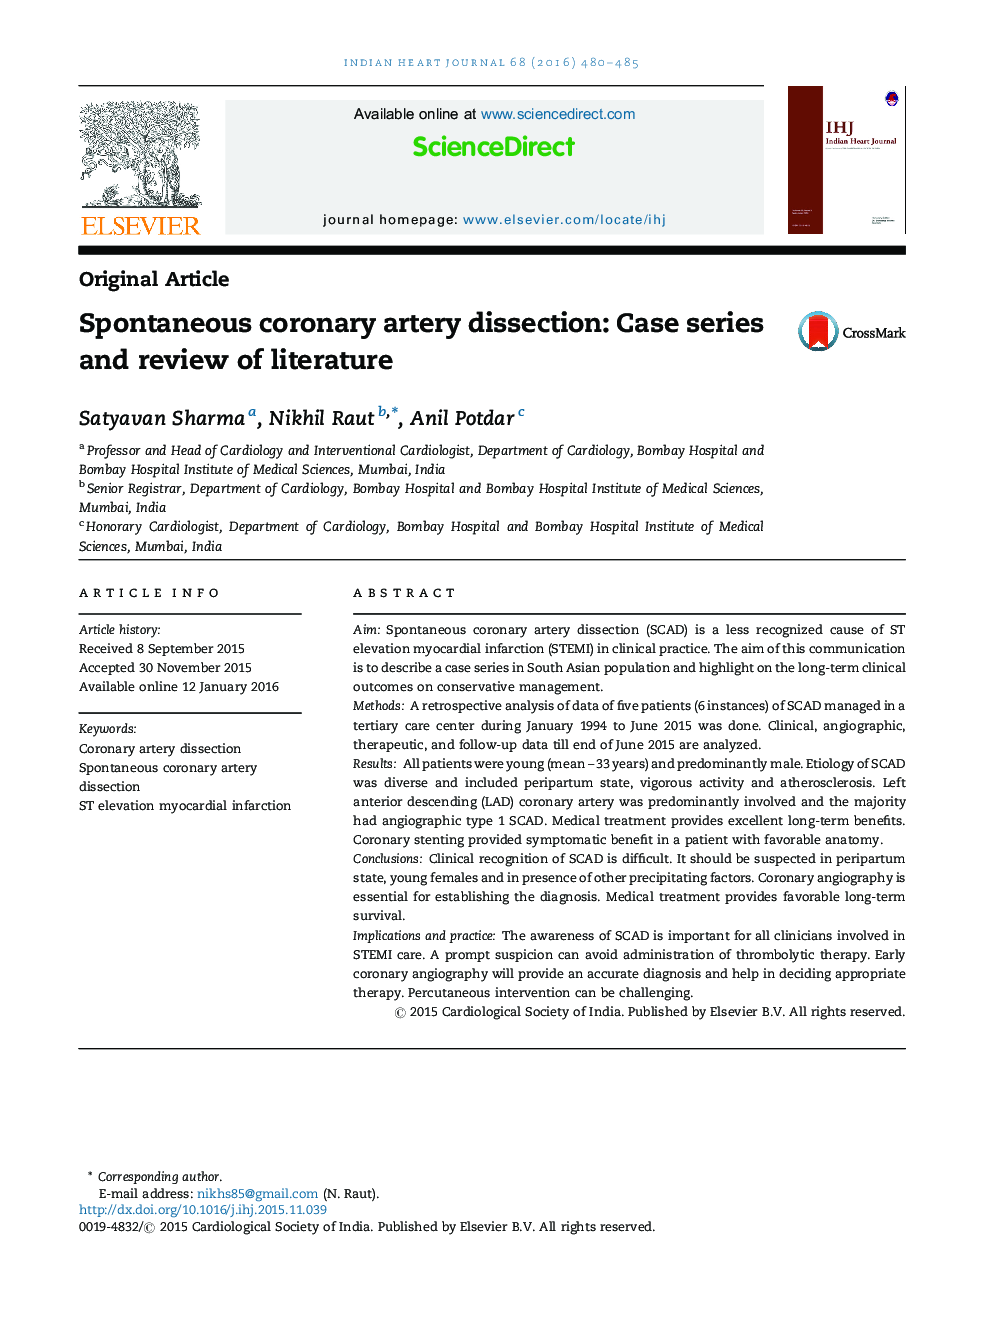 Spontaneous coronary artery dissection: Case series and review of literature